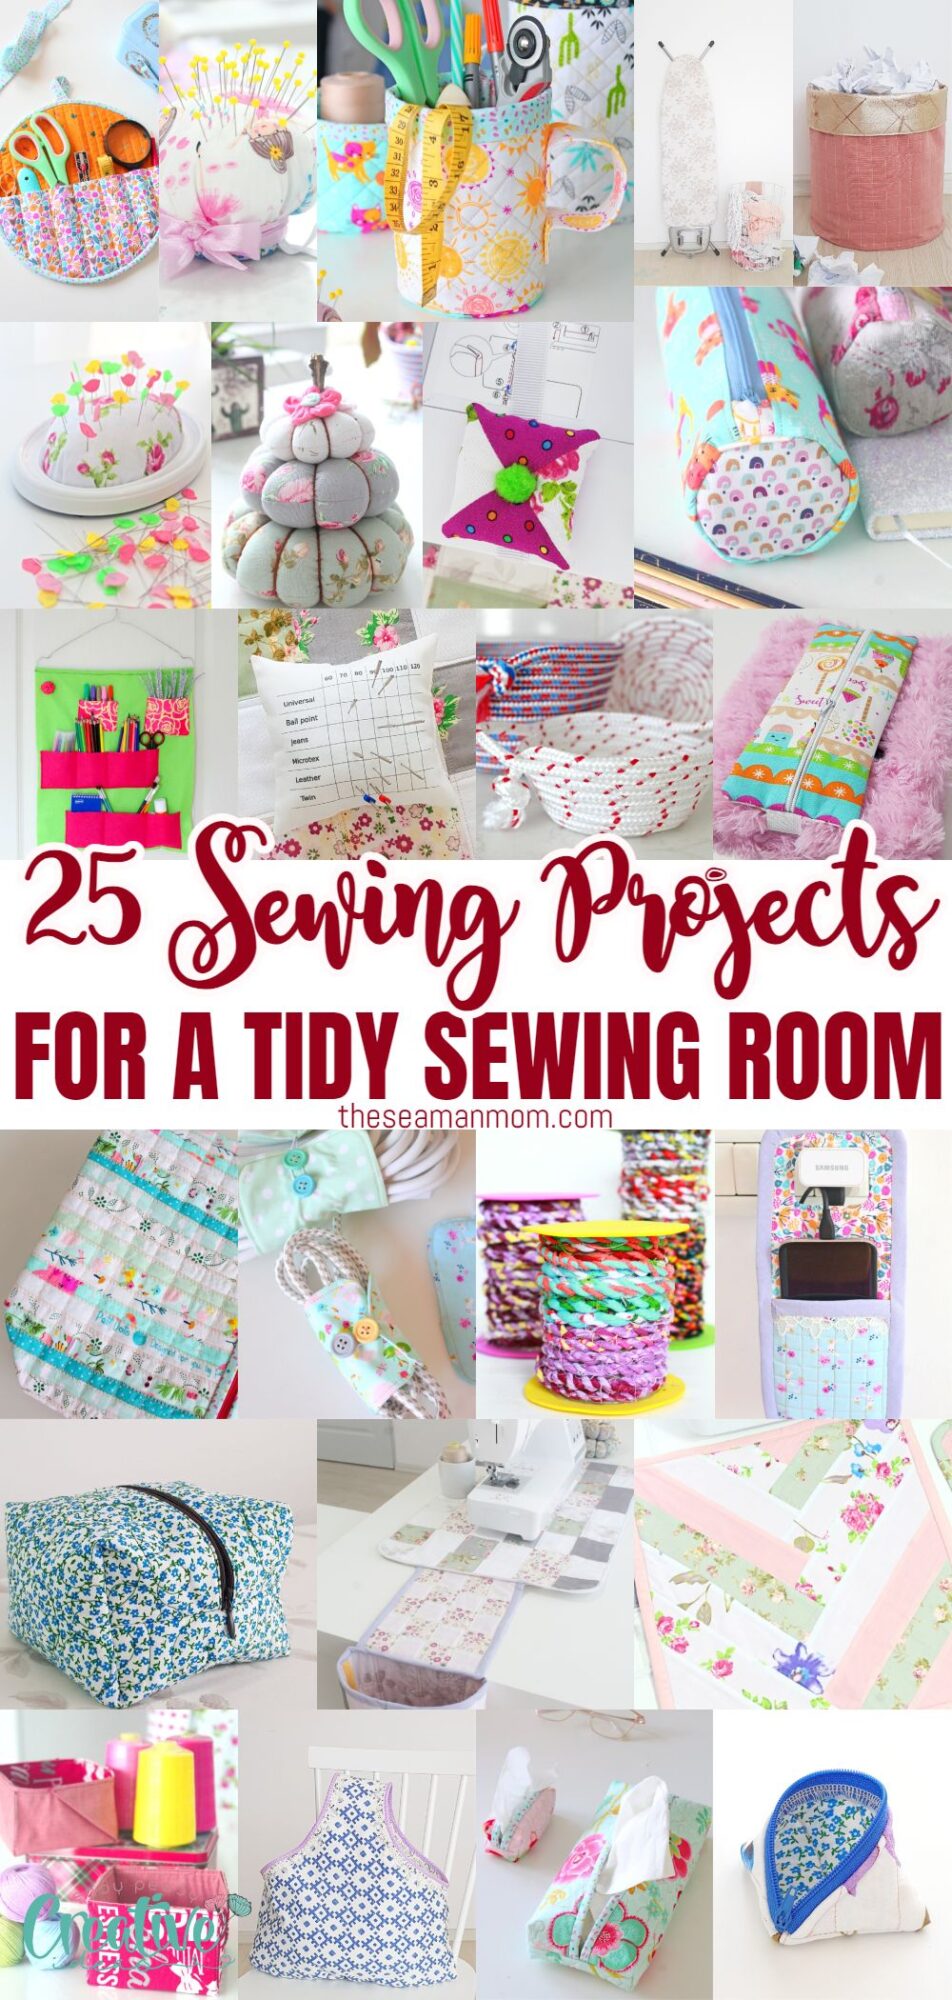 25 sewing projects for a tidy, organized sewing room: From cute pincushions to stylish sewing mats, get inspired to create in your cozy space!